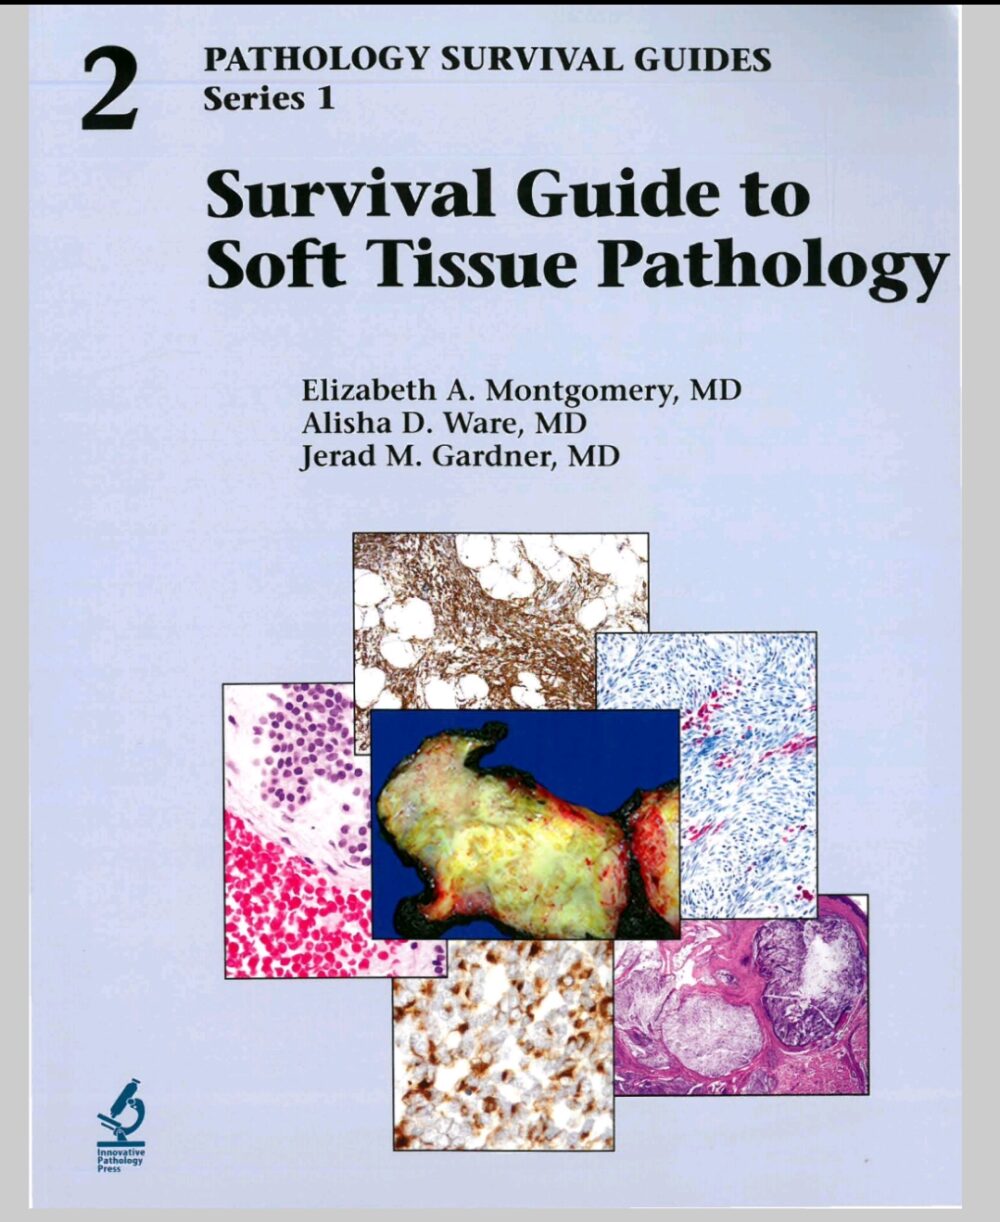 Survival Guide to Soft Tissue Pathology 2nd Ed Second Edition